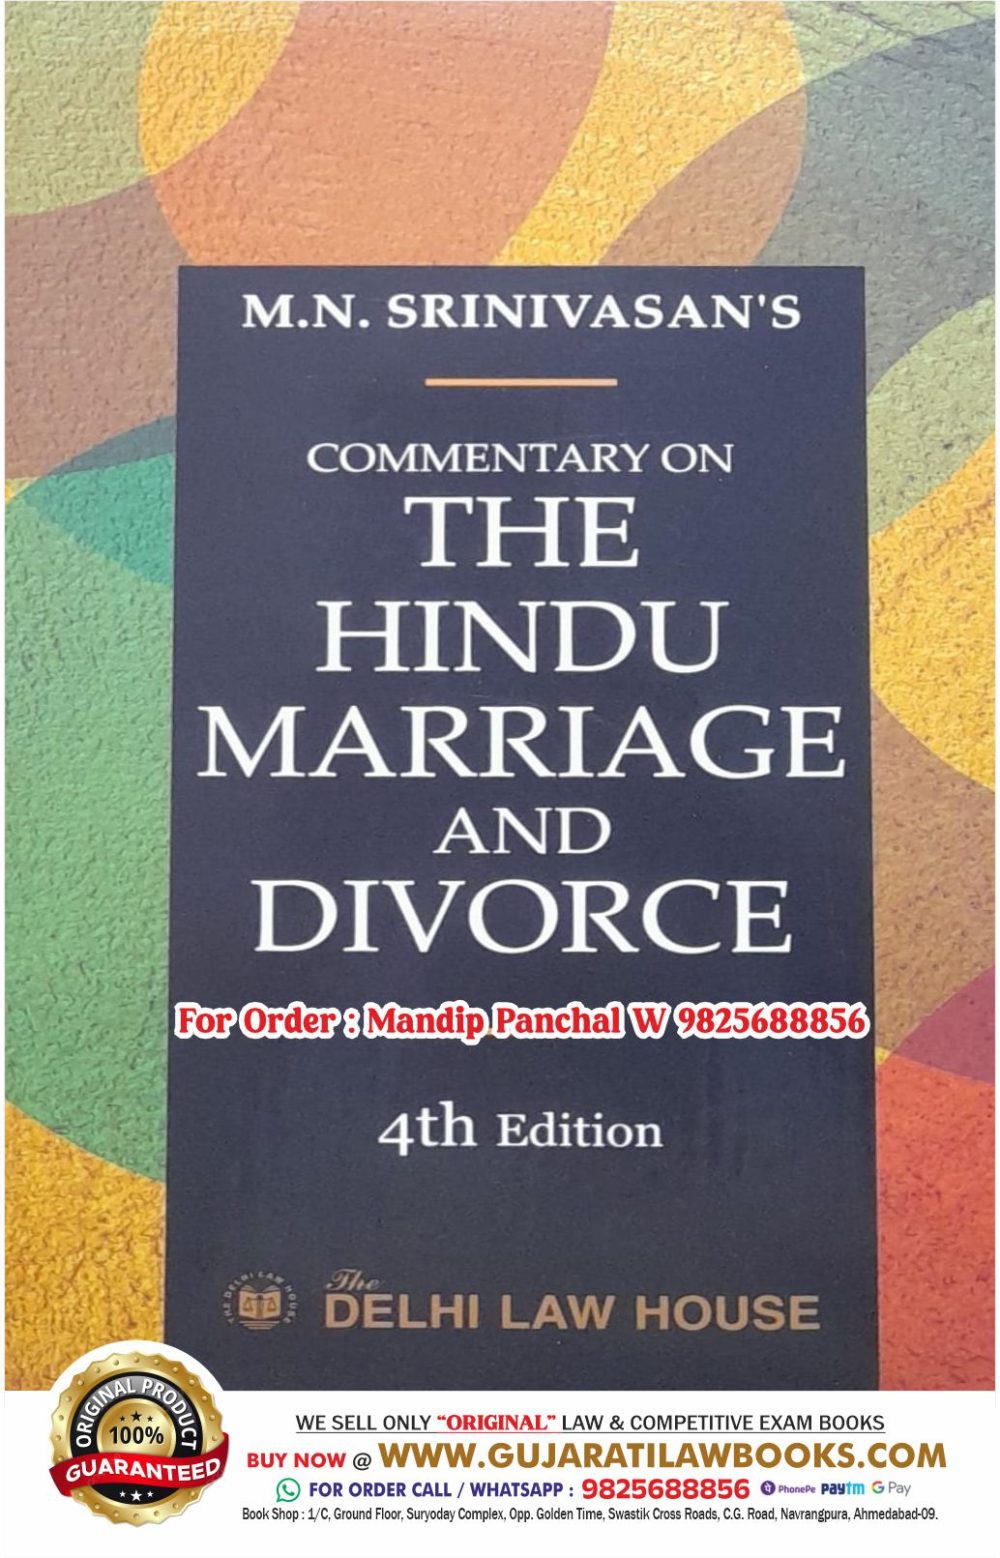 M N Shrivasan's COMMENTARY ON THE HINDU MARRIAGE AND DIVORCE - Latest 4th Edition March 2024 Delhi Law House